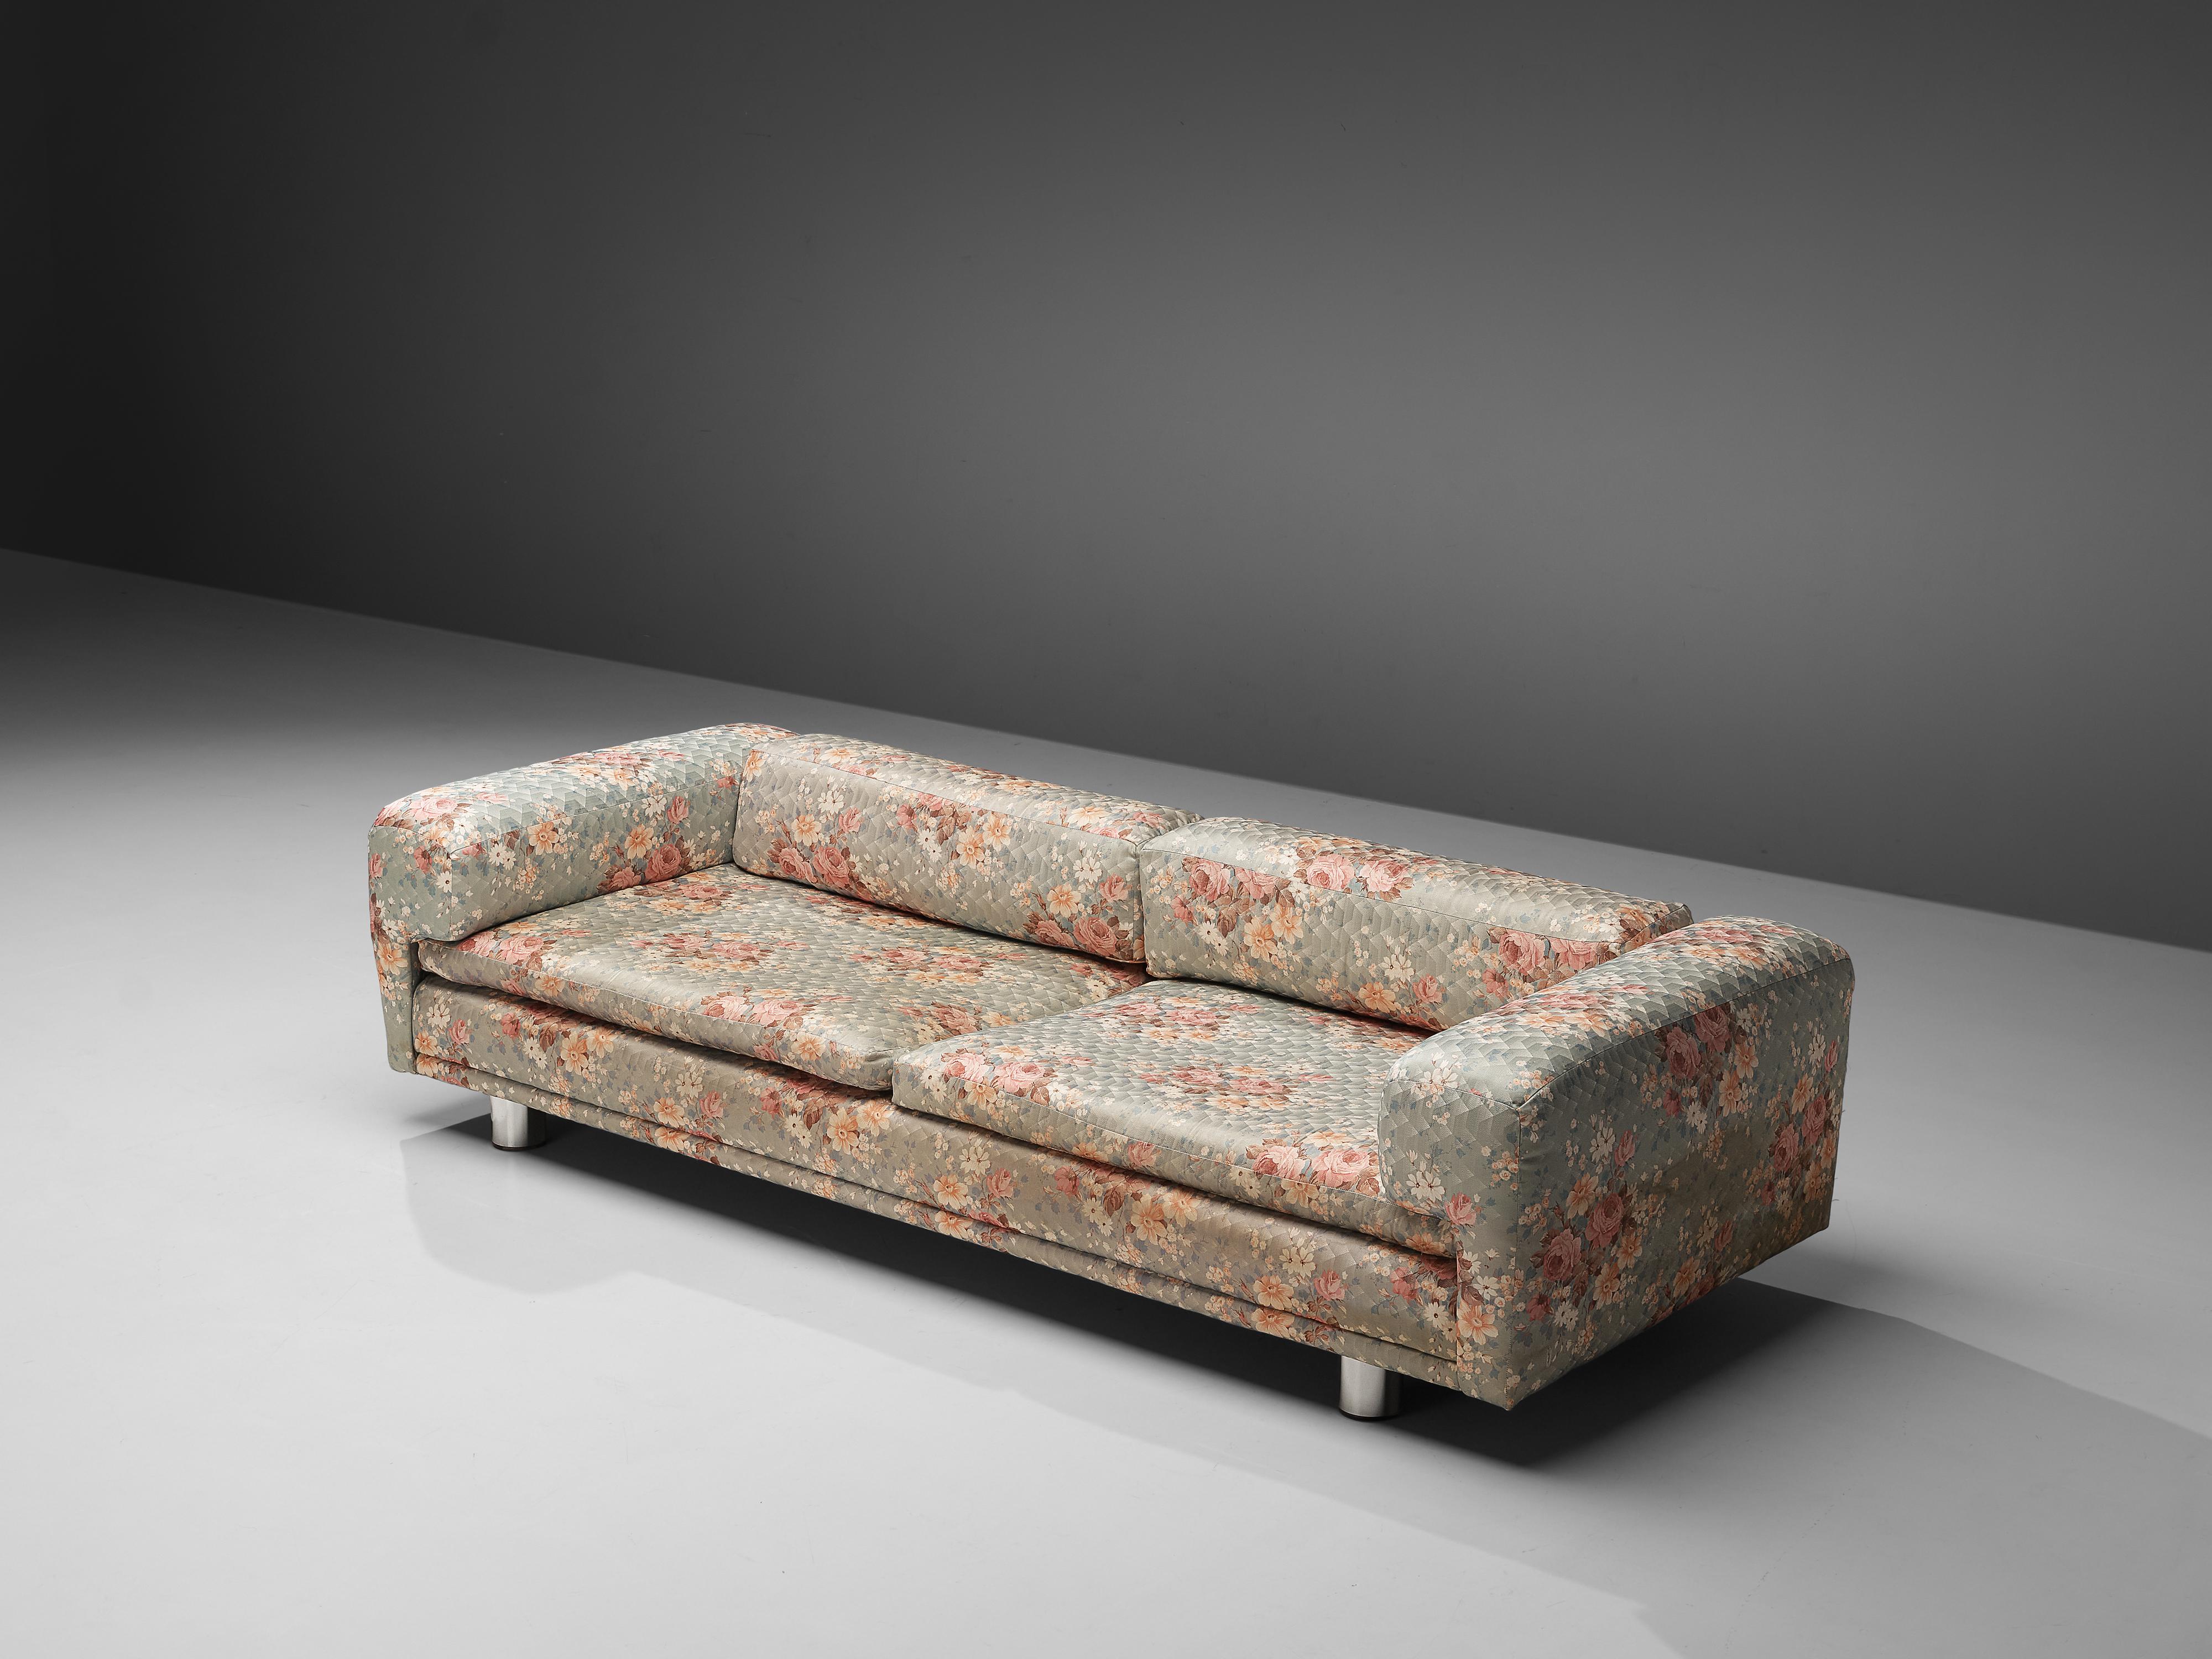 Howard Keith for HK Furniture, 'Diplomat' sofa, floral upholstery, metal, United Kingdom, 1970s

Grand voluptuous 'Diplomat' sofa by Howard Keith for HK Furniture, designed in the 1970s. The sofa with a deep seat are a true delight to sit and relax